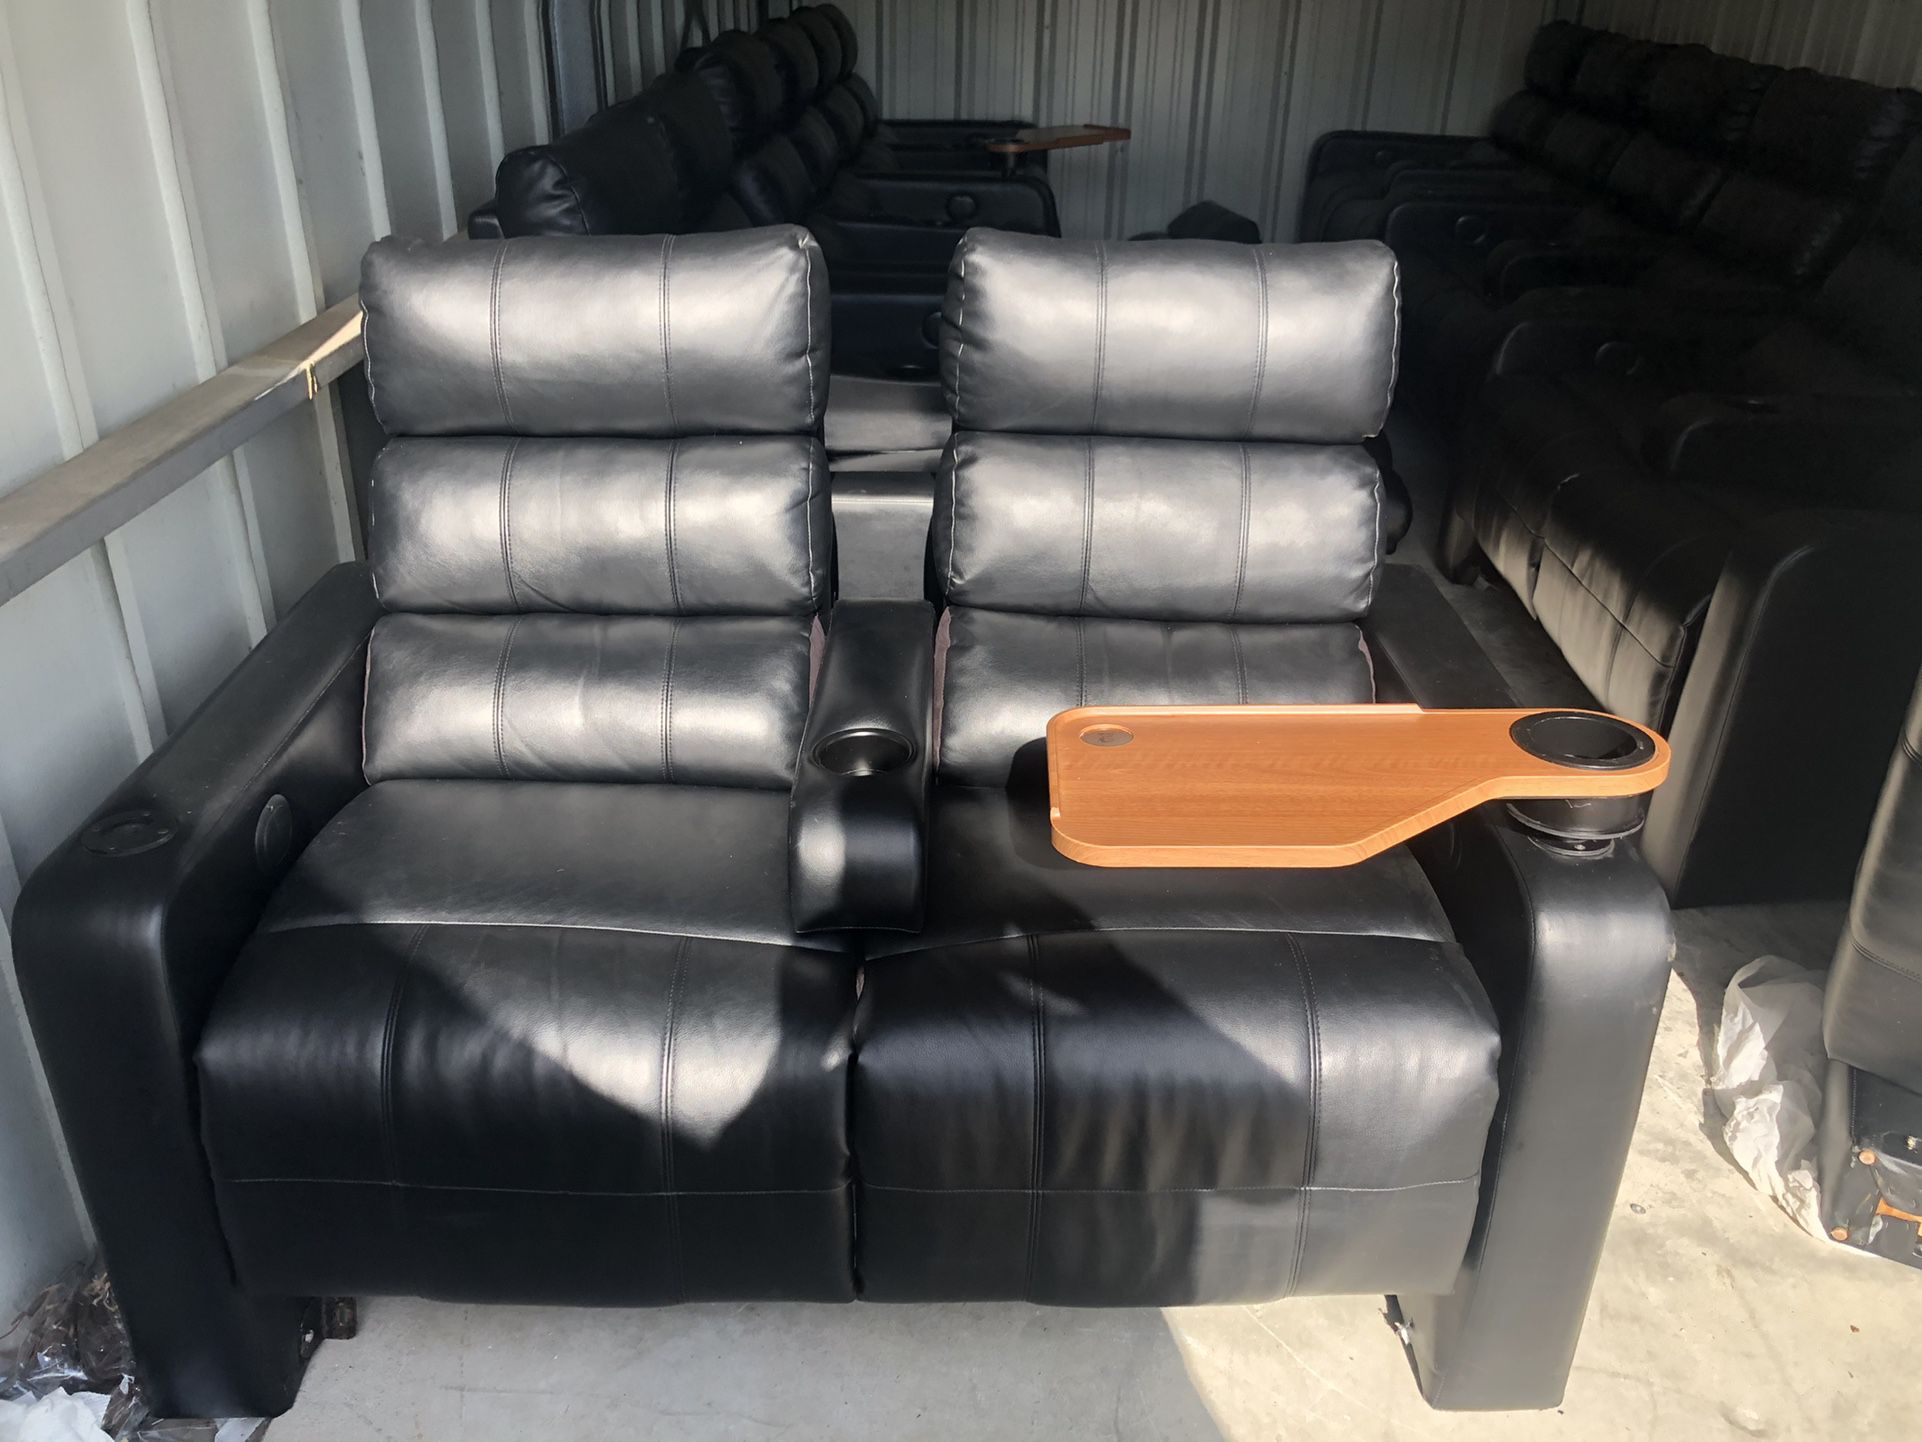 Power Reclining Theater Chairs